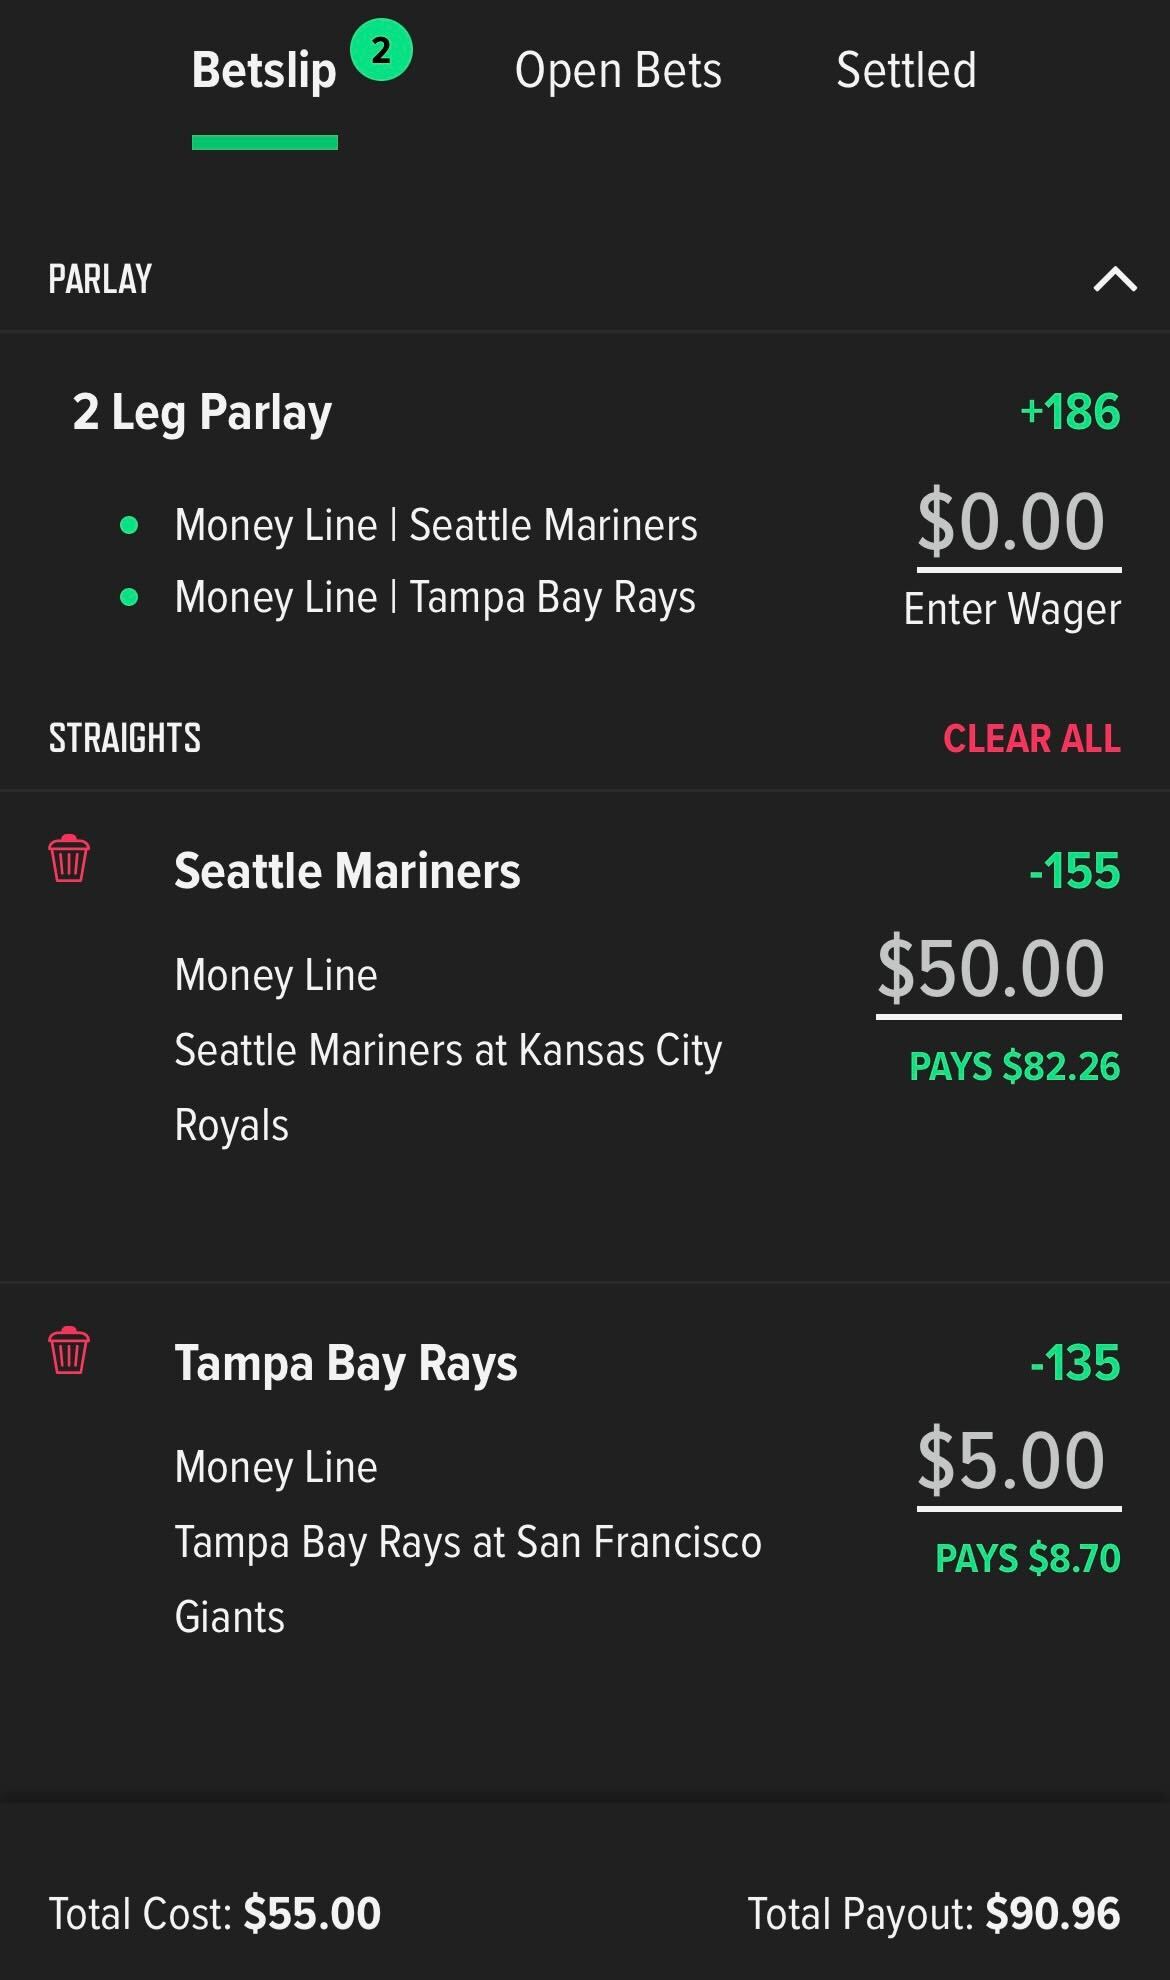 Straight bets can easily be combined into a parlay using the Caesars Sportsbook app. 